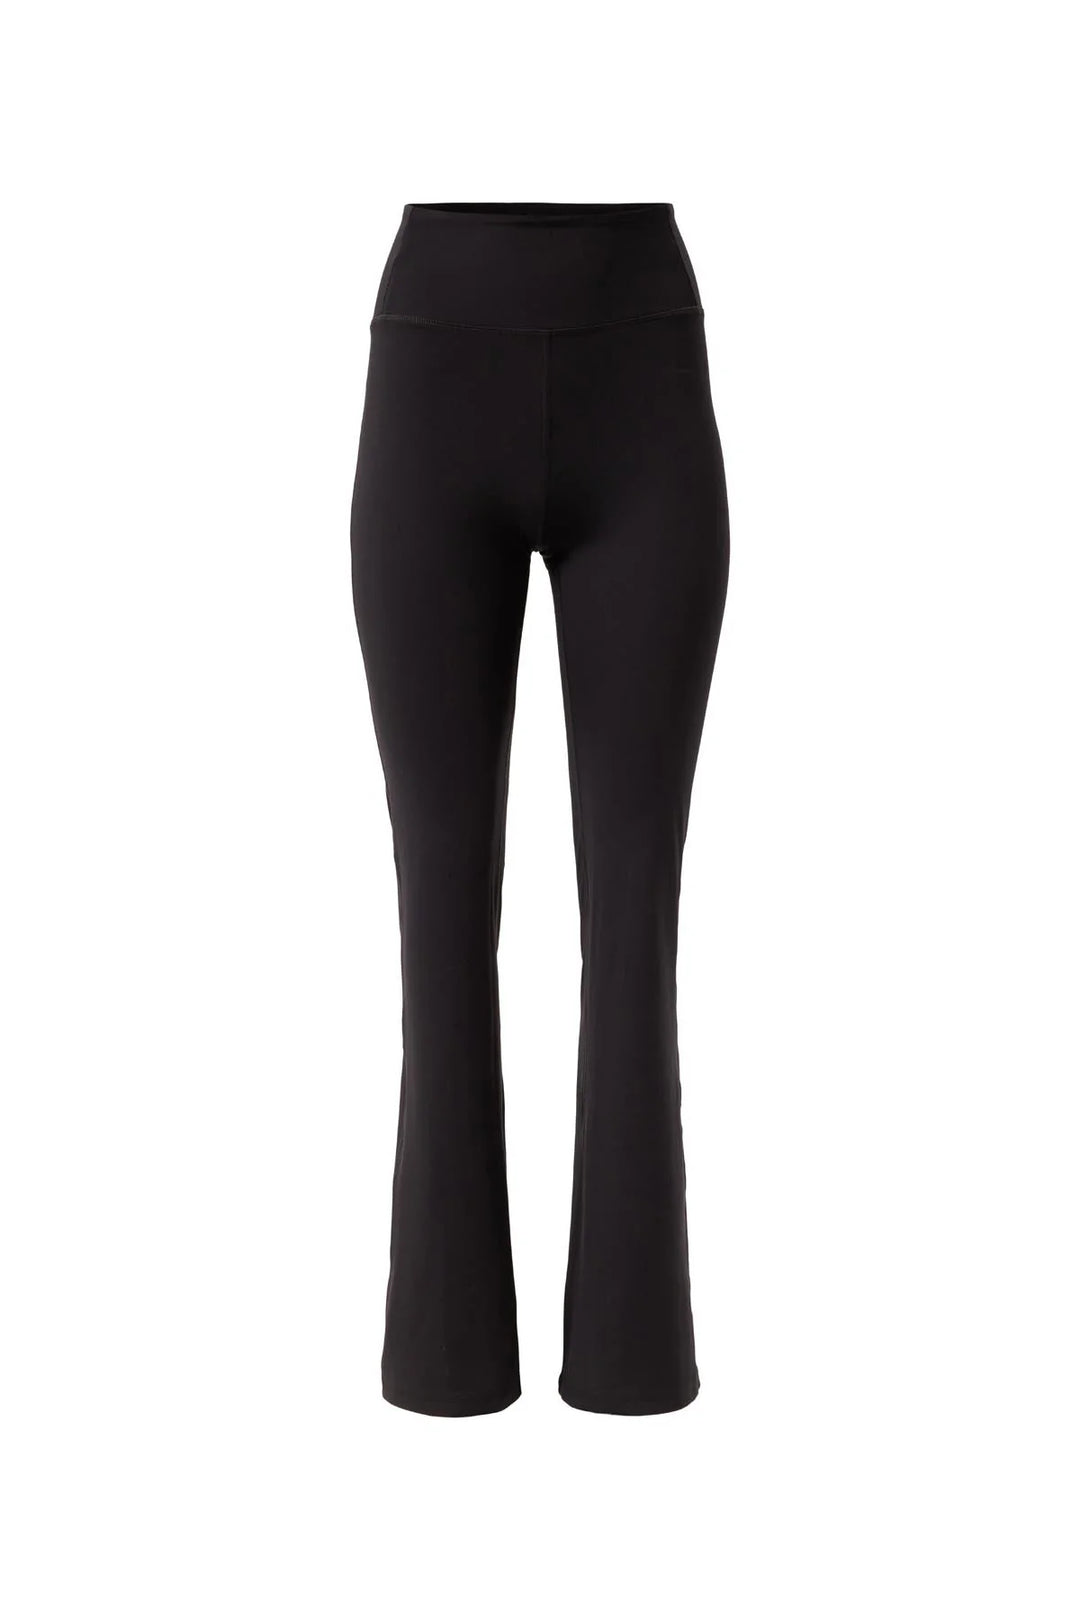 Black Compressive Leggings by Girlfriend Collective on Sale